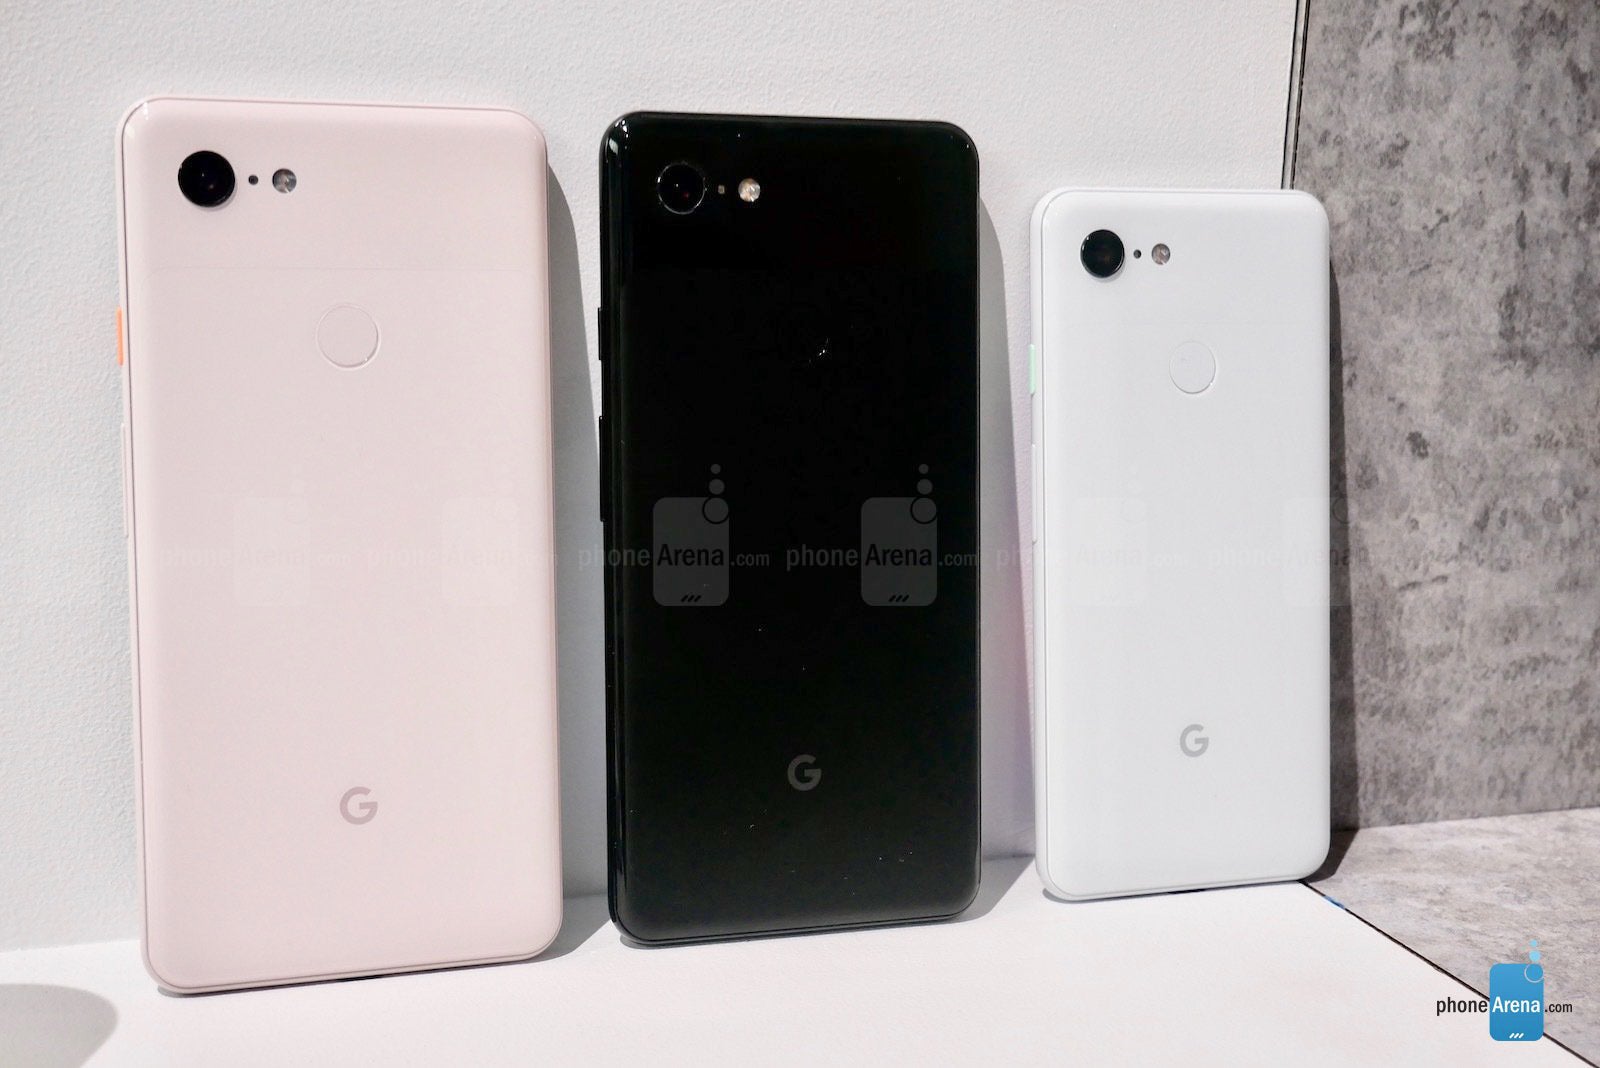 Google Pixel 3 and Pixel 3 XL Hands-On: Google doubles down on photography